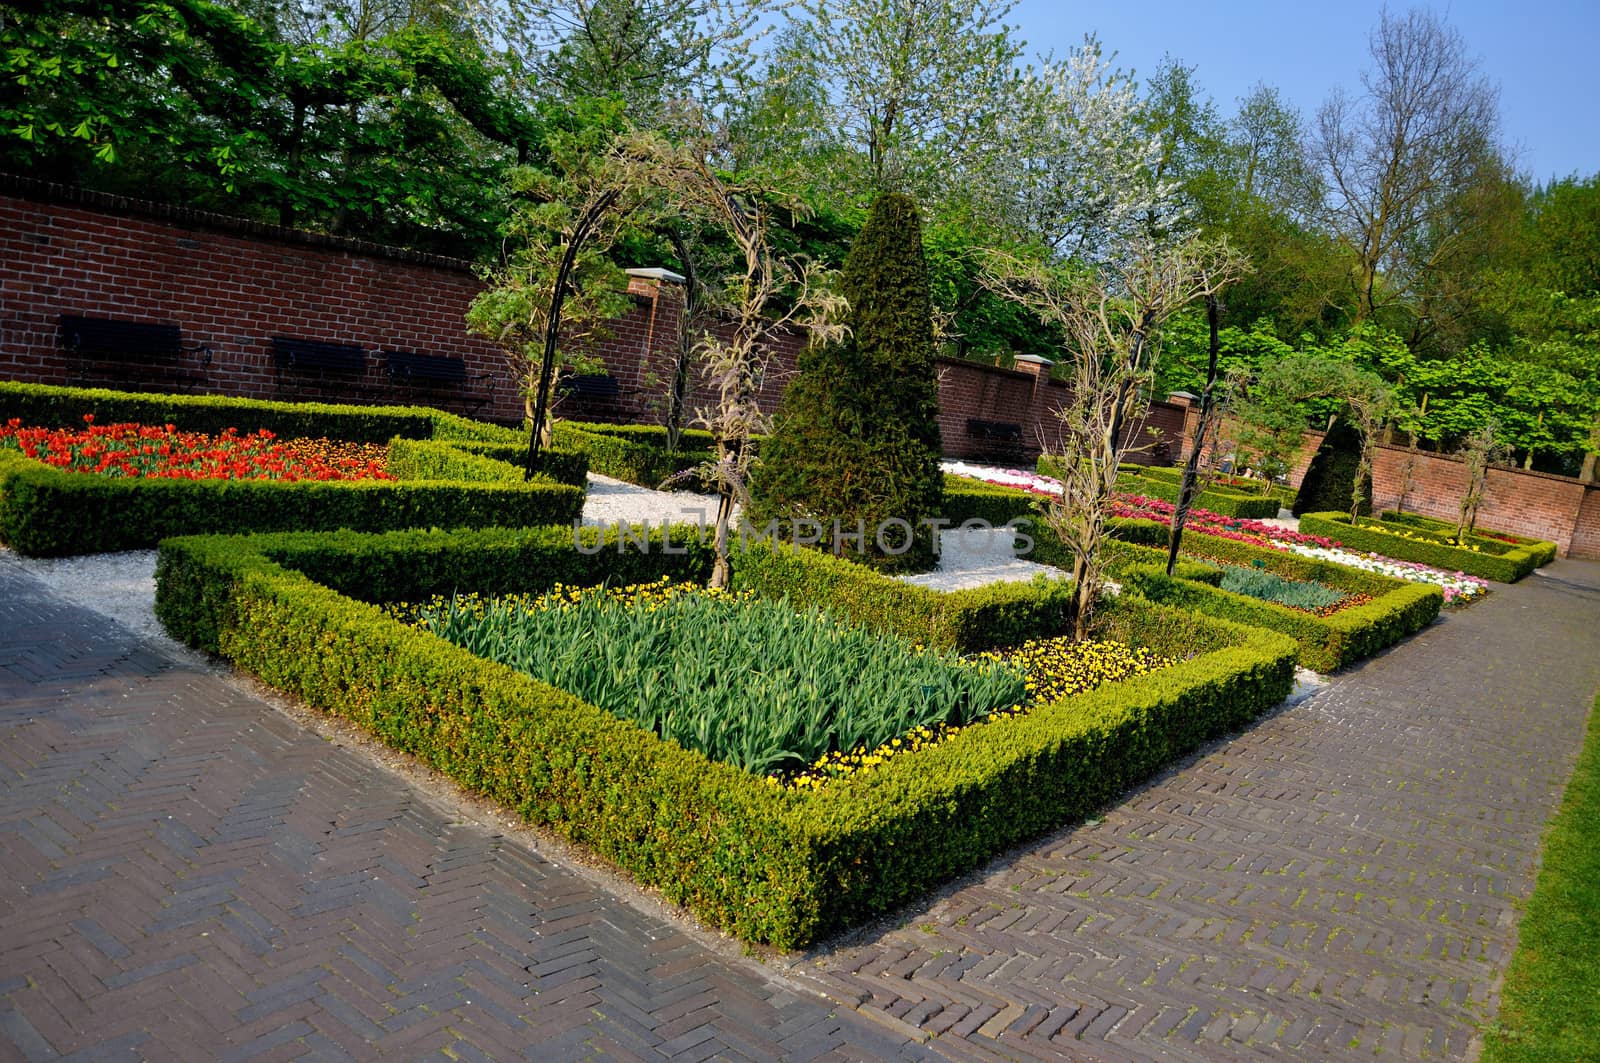 Garden with small bushes in Keukenhof park in Holland by Eagle2308